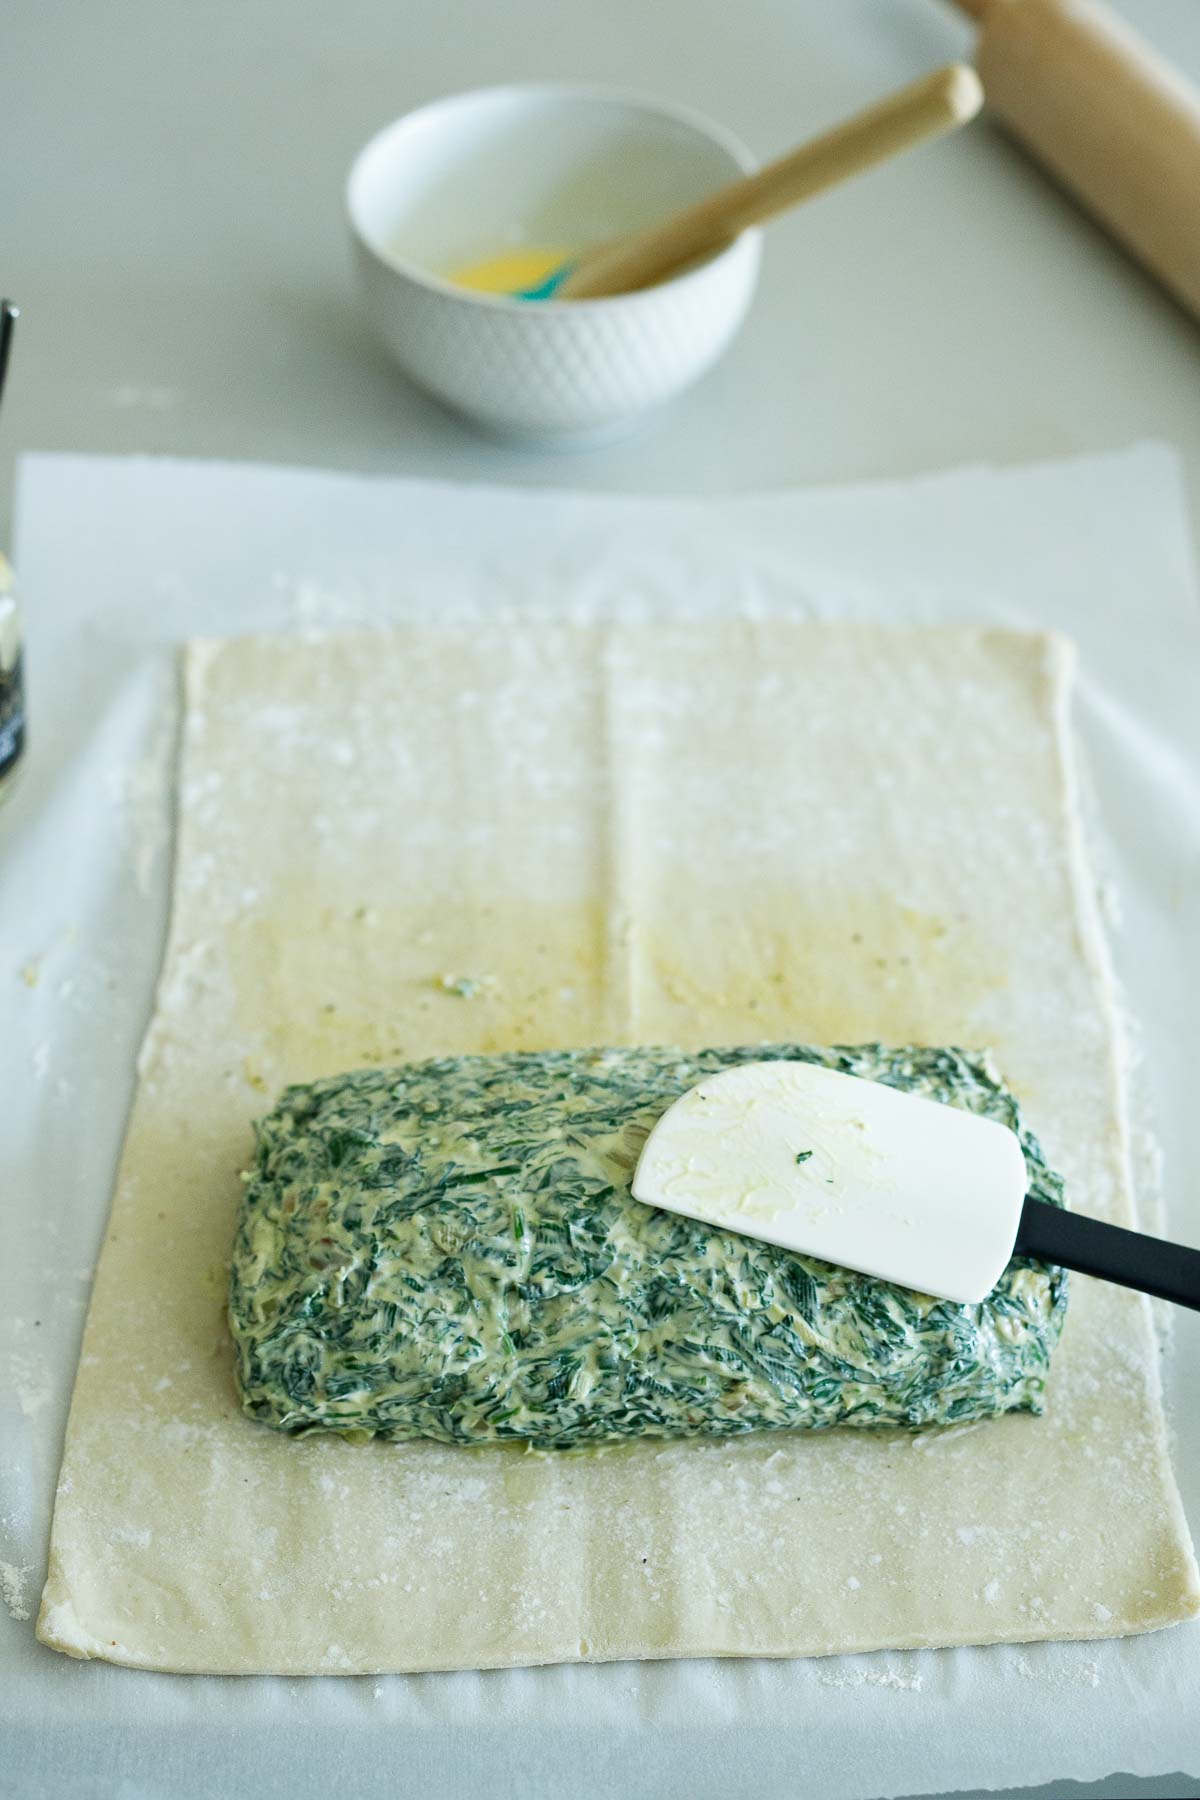 rubber spatula spreading creamy spinach filling around all edges of the salmon, smoothing it out.